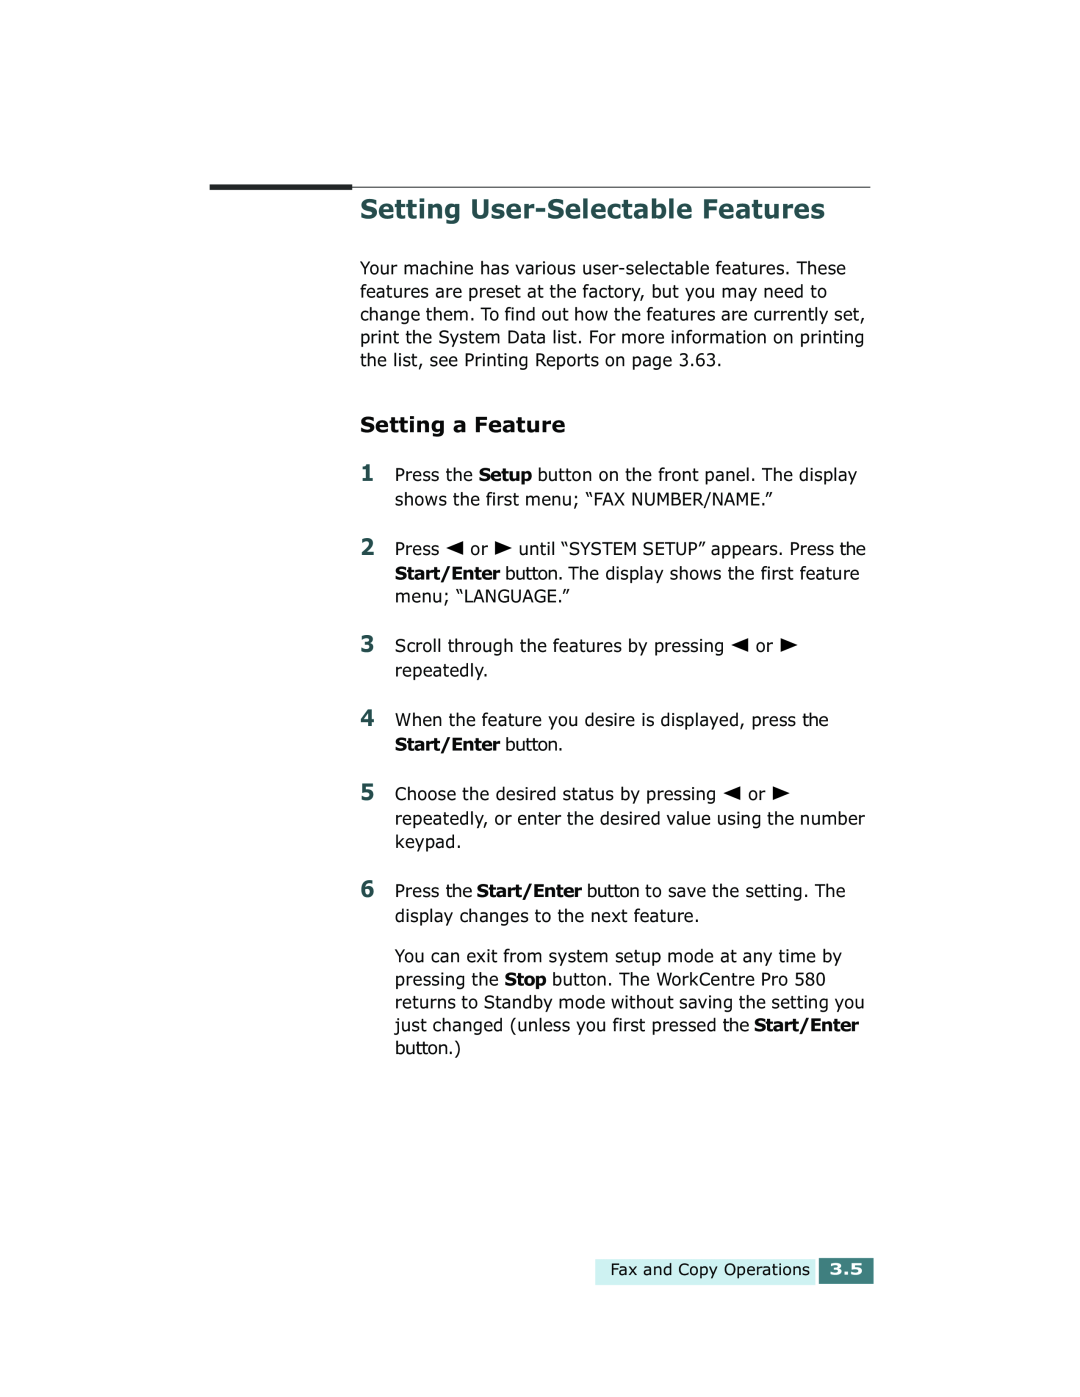 Xerox Pro 580 manual Setting User-Selectable Features, Setting a Feature 